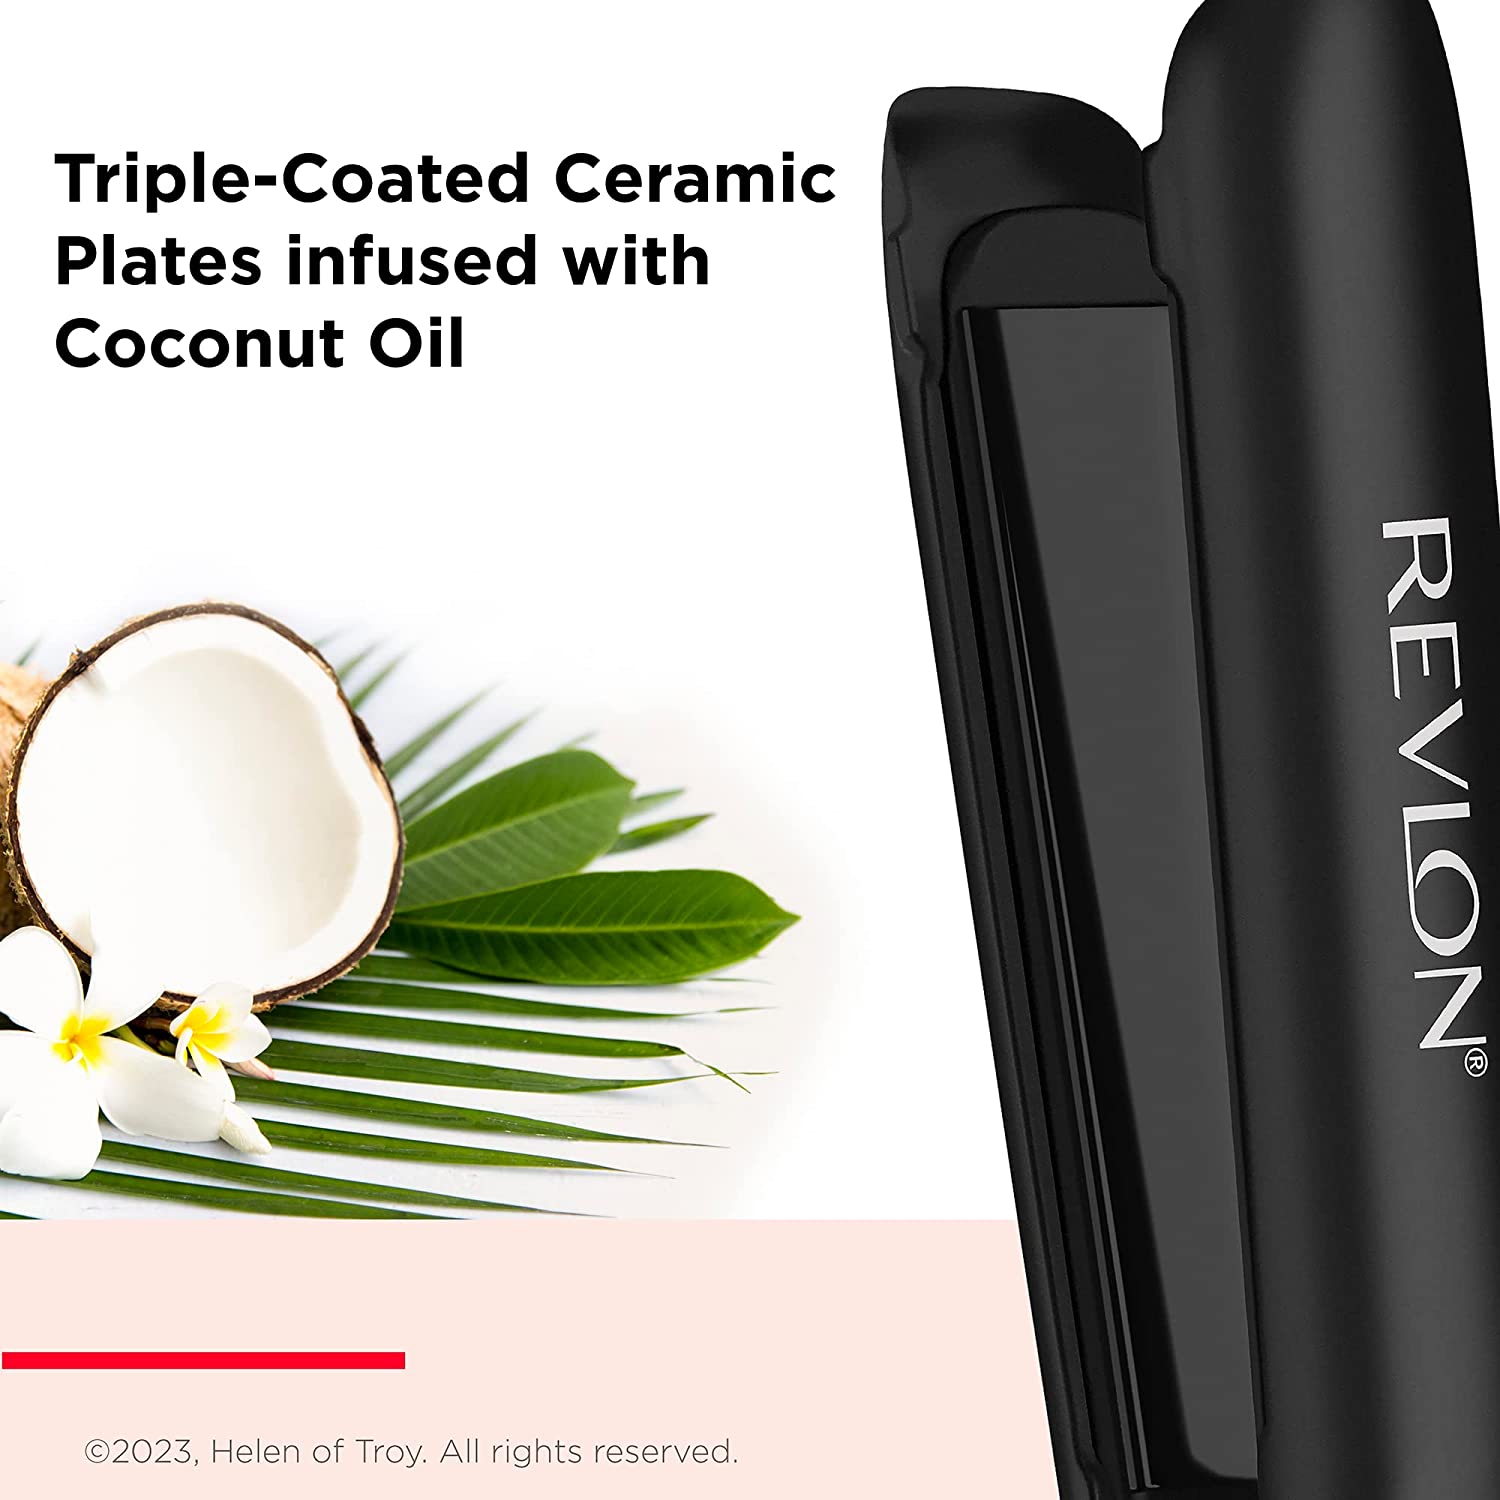 Revlon Smoothstay Coconut Oil-Infused Hair Straightener 25mm Plates Temperature up to 235°C,RVST2211P - Healthxpress.ie